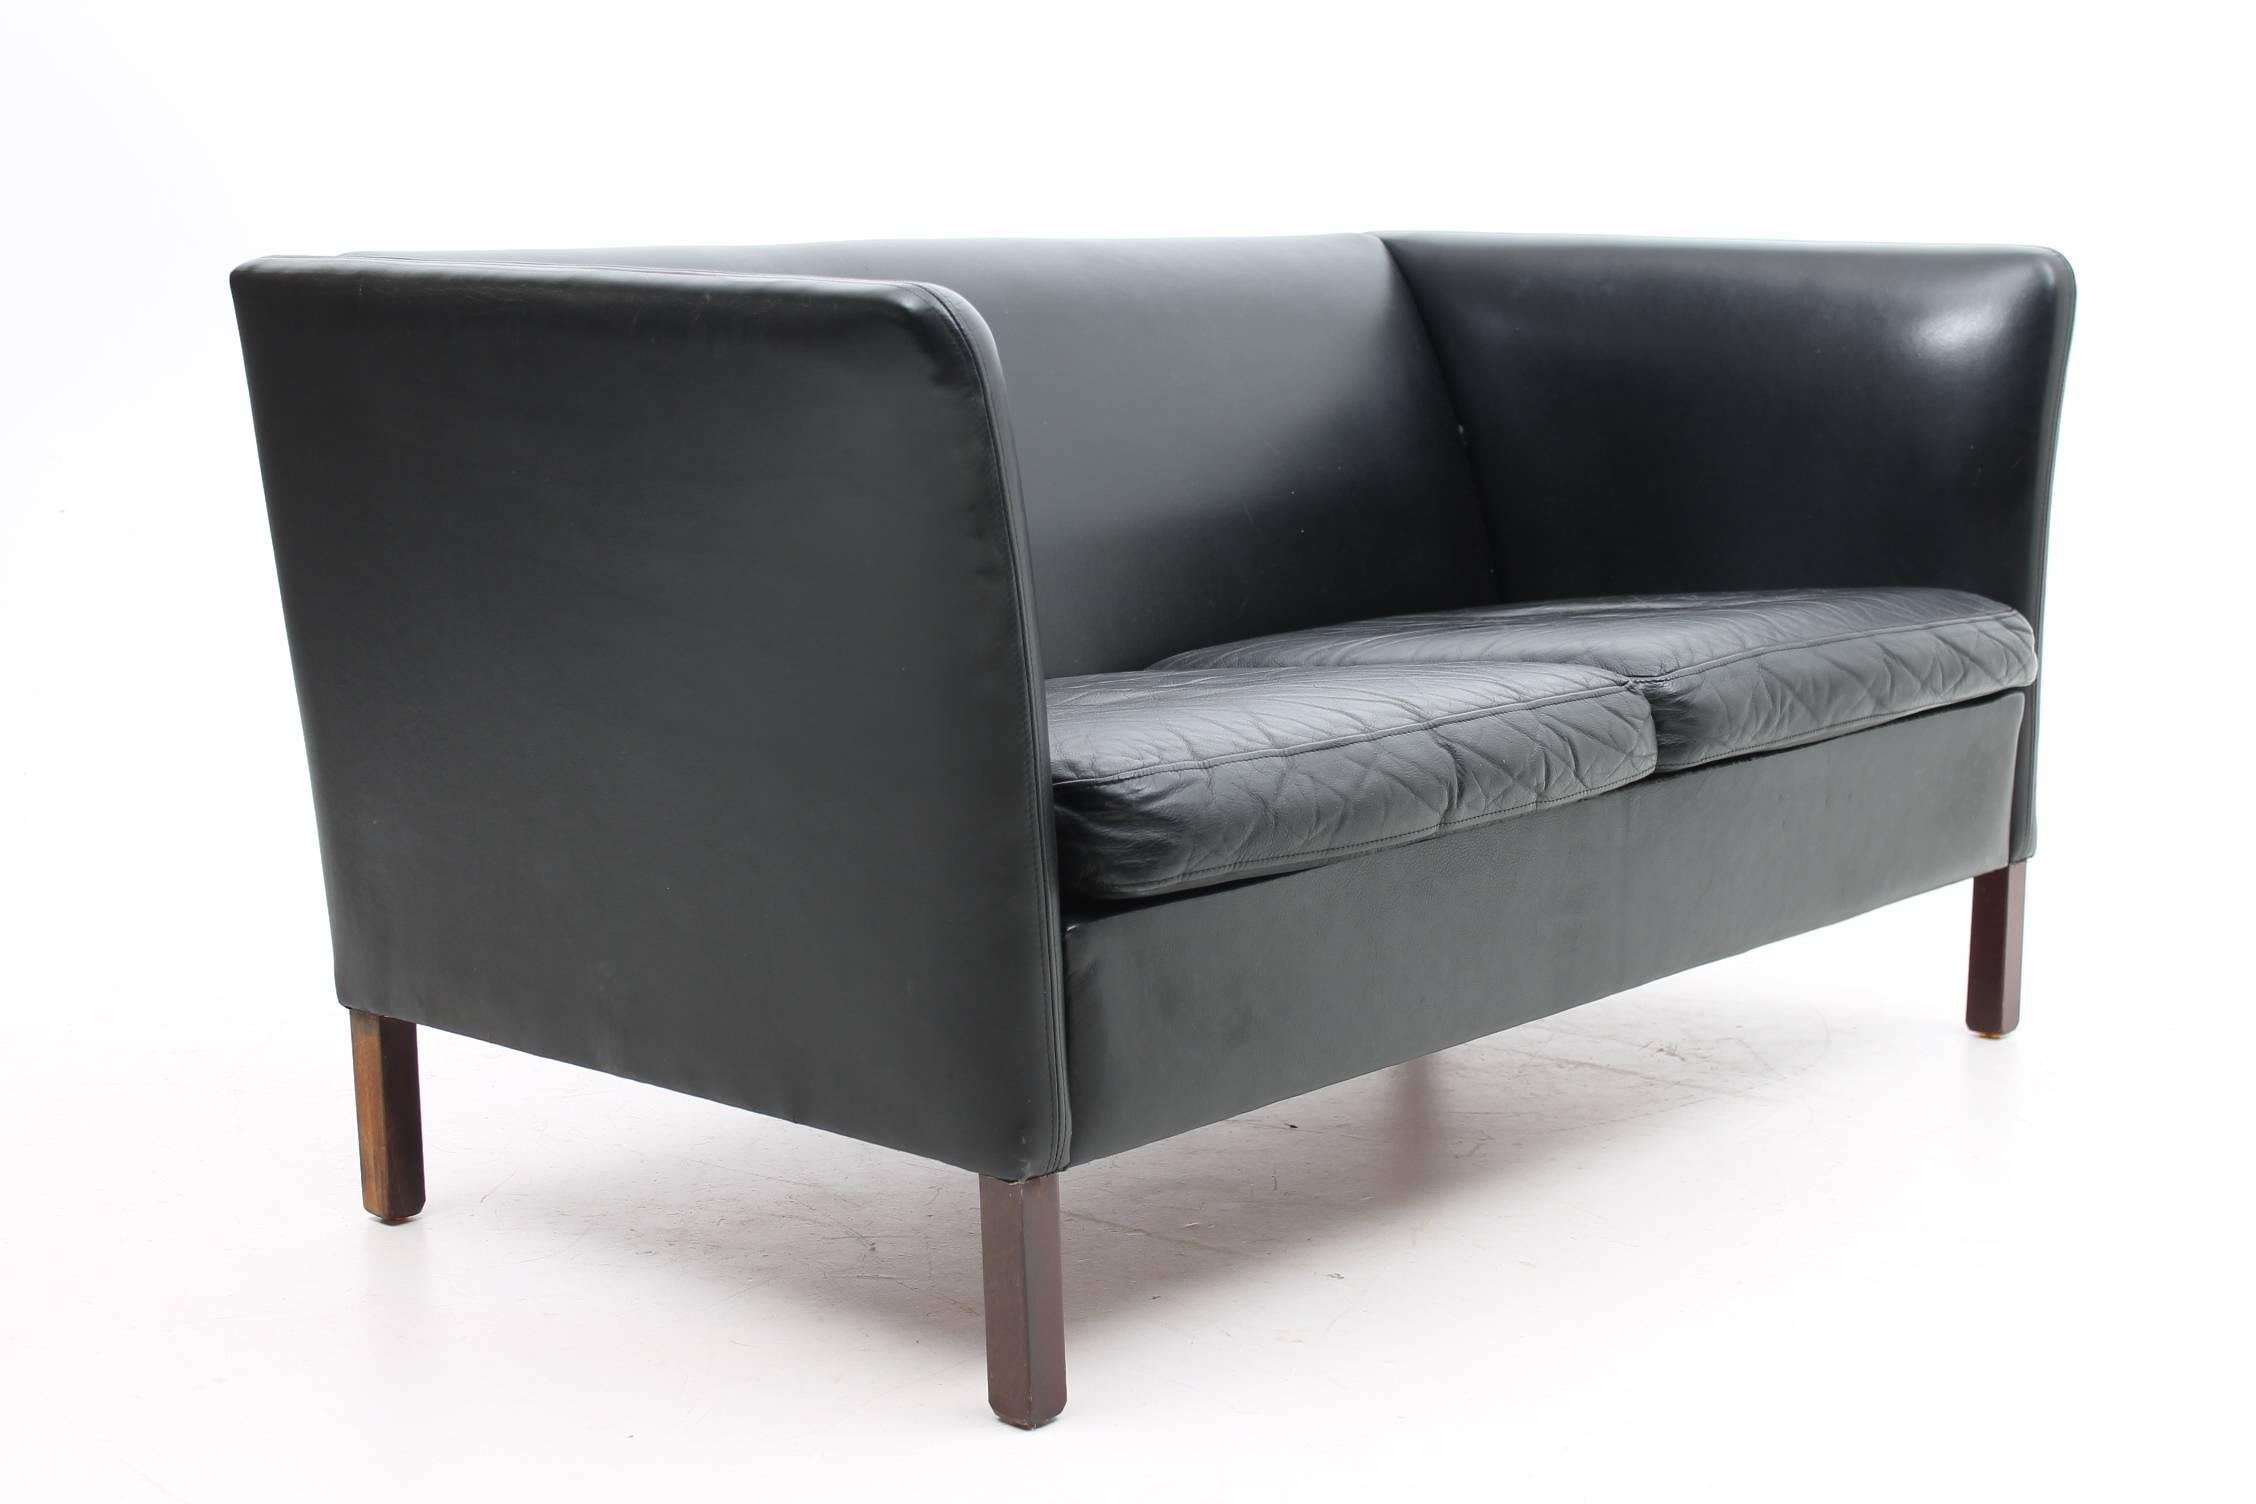 This is a gorgeous black leather loveseat is beautiful from every angle. The black leather is timeless, the curved arms give the loveseat a sofer look, and the wood legs are polished and simple. The loveseat was designed by Hans Olsen for CS Møbler,